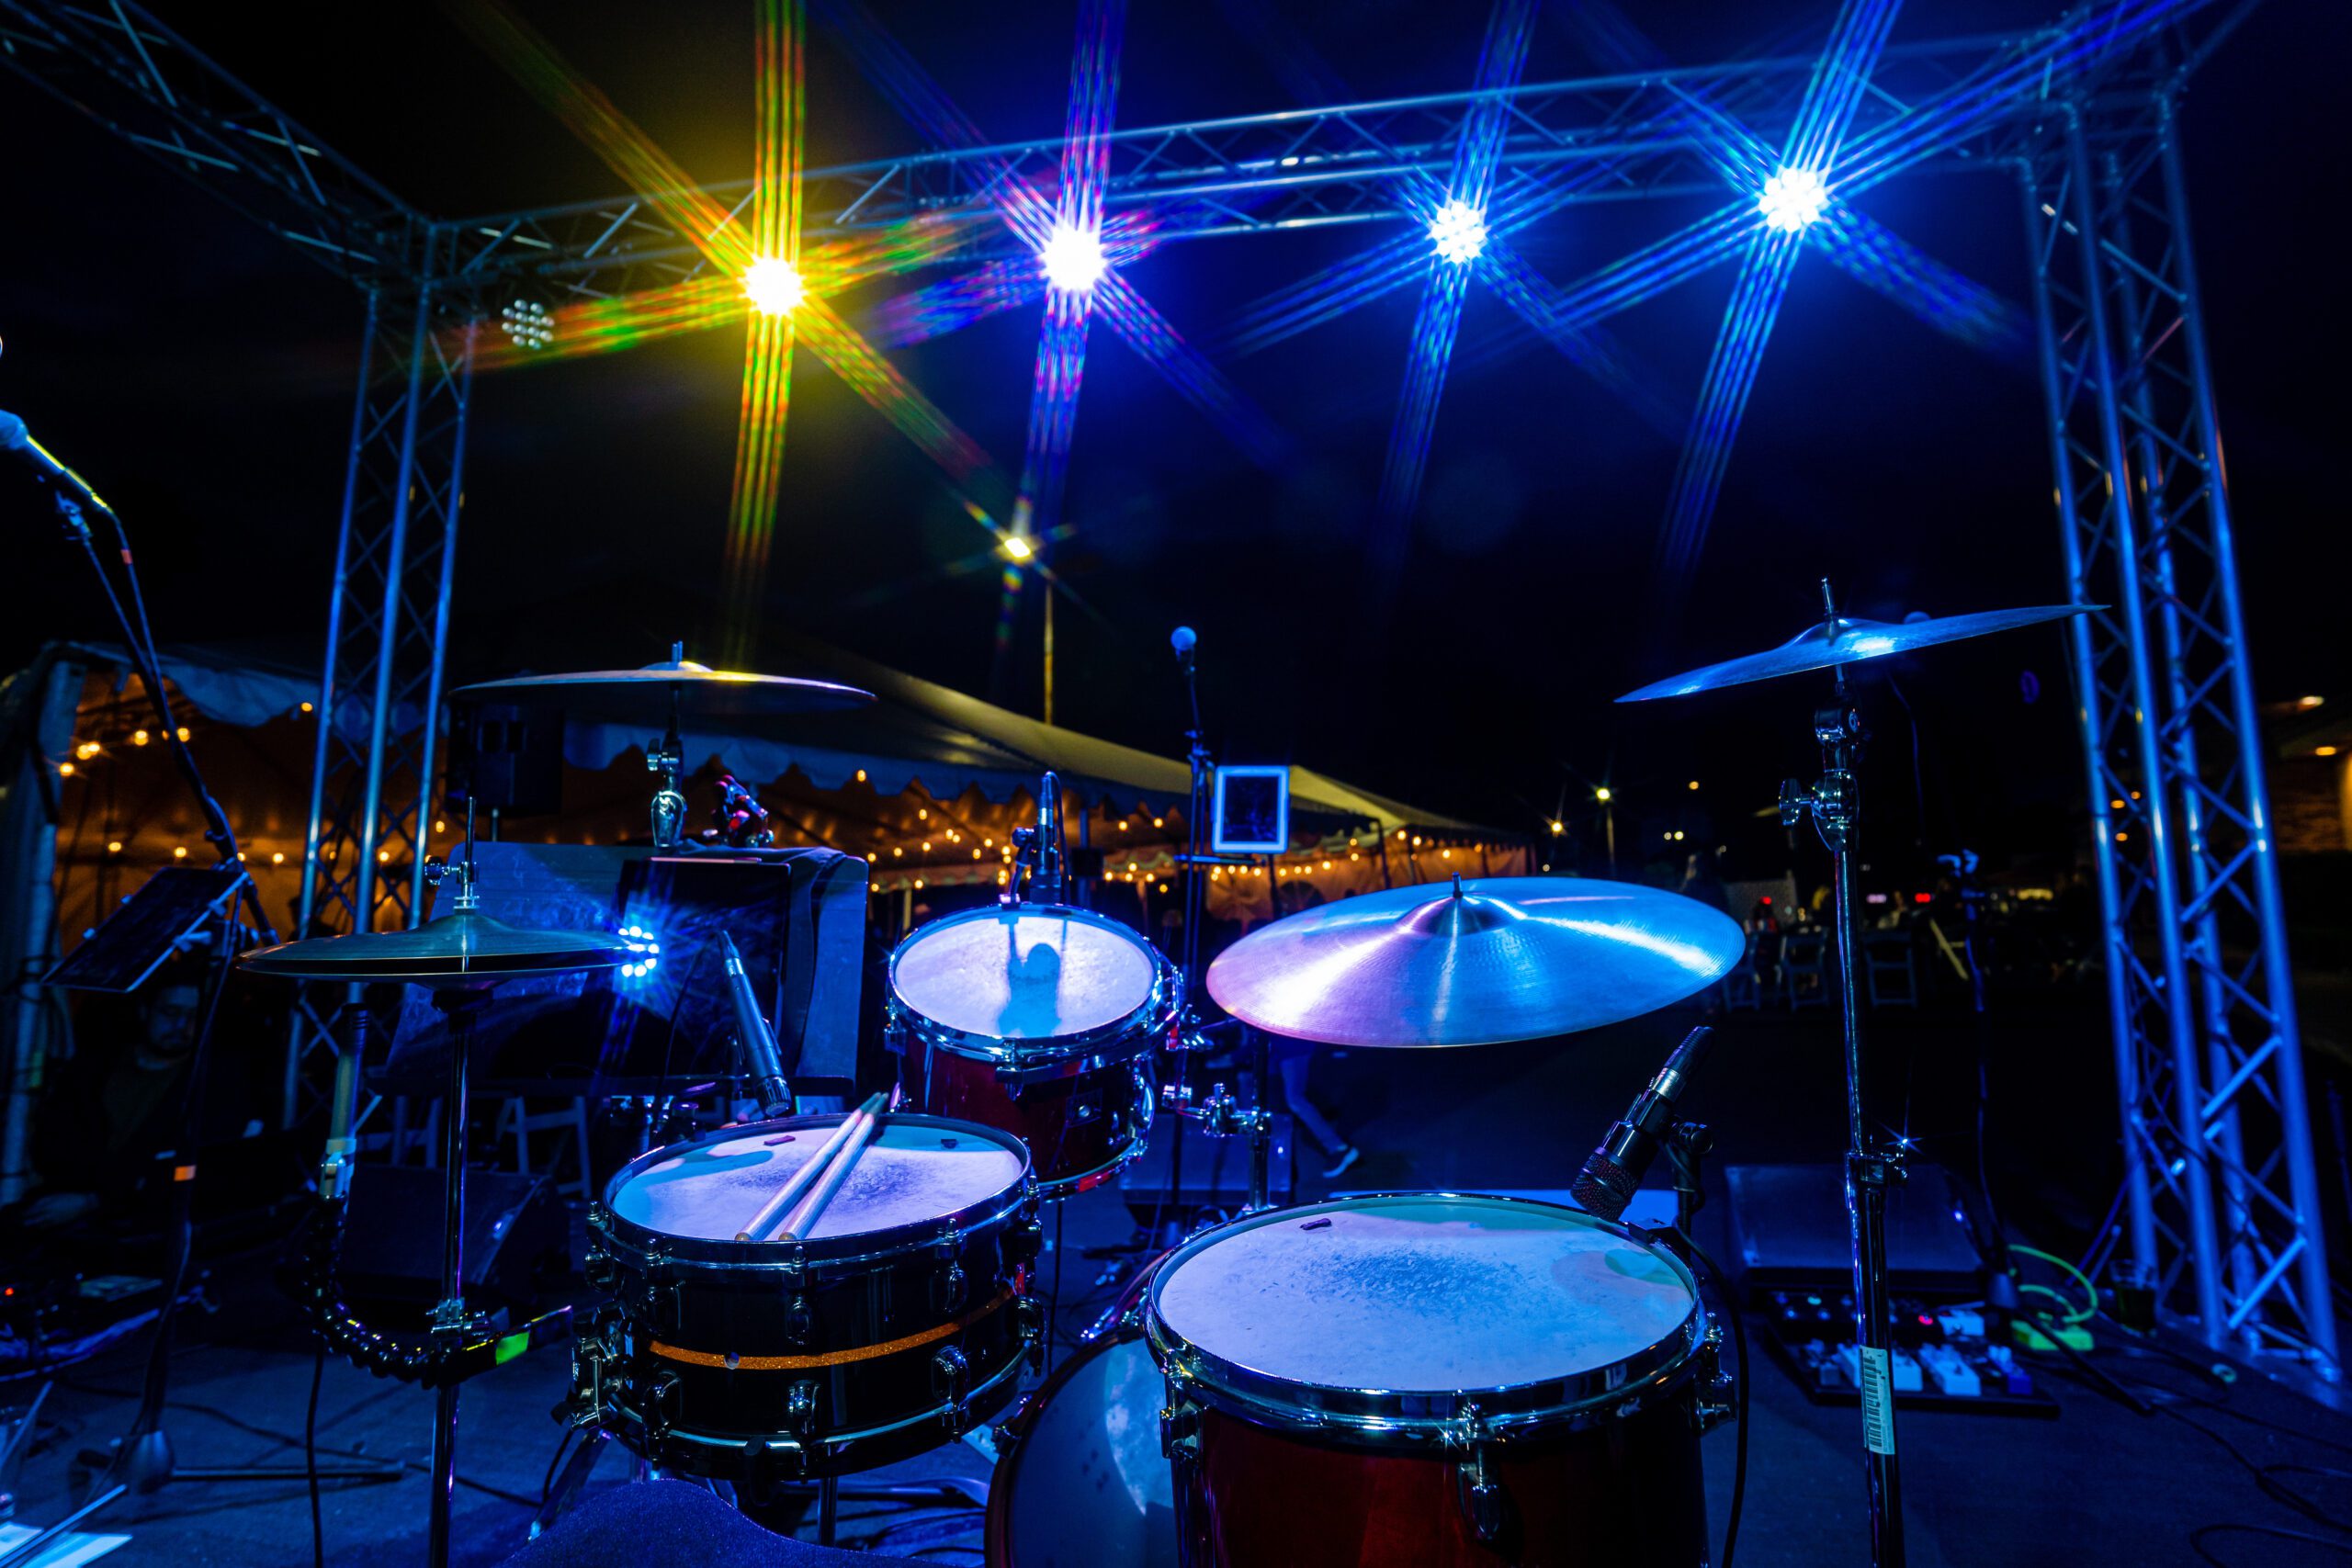 Full Drum Set Kit at Live Outdoor Music Show at Night with Microphone and Yellow Cool Blue Lights Nightlife.